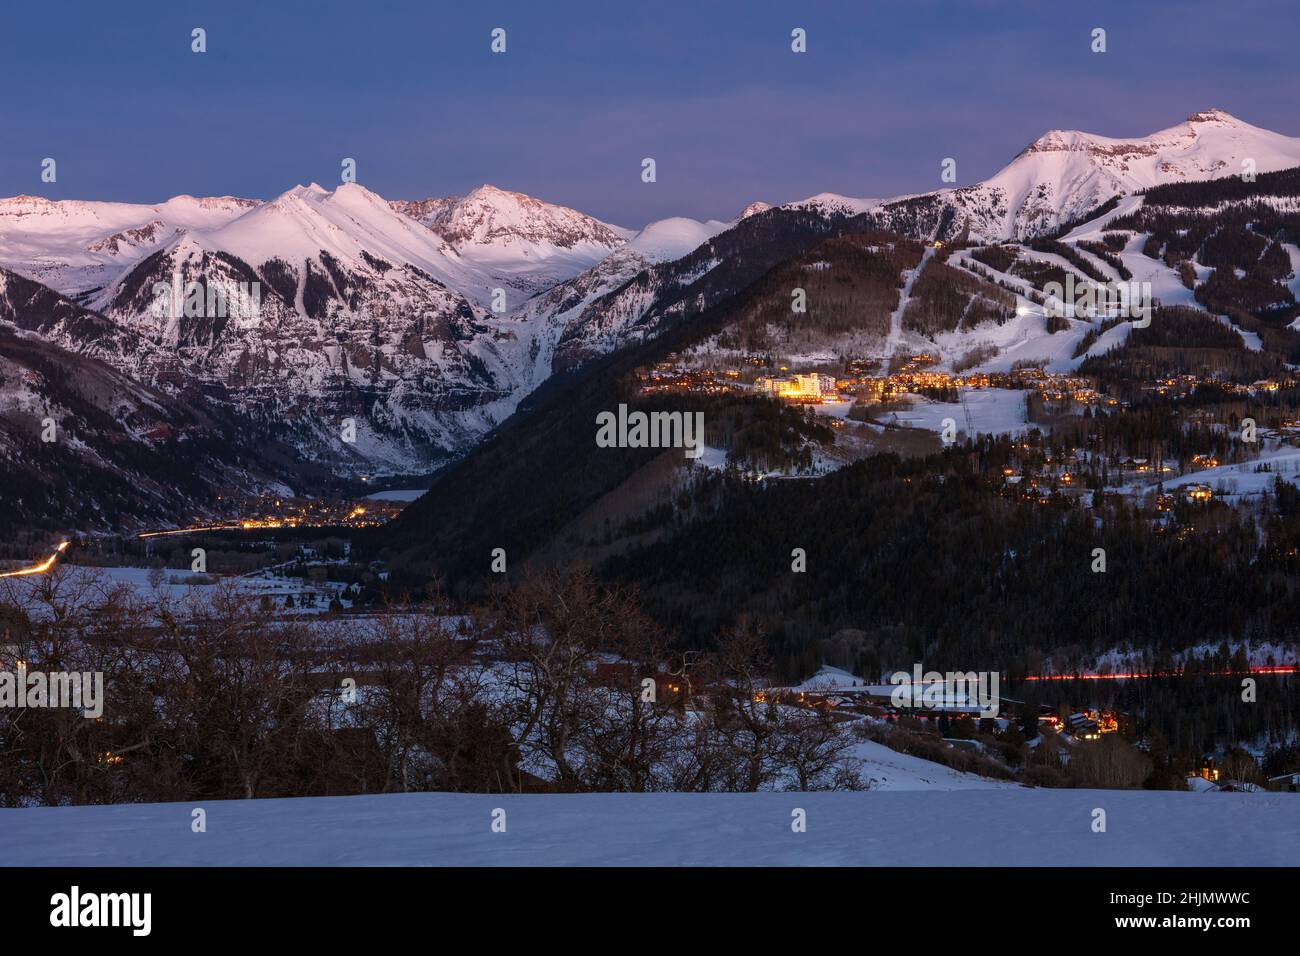 The San Juan Mountains and Telluride, Colorado in winter with fresh snow Stock Photo